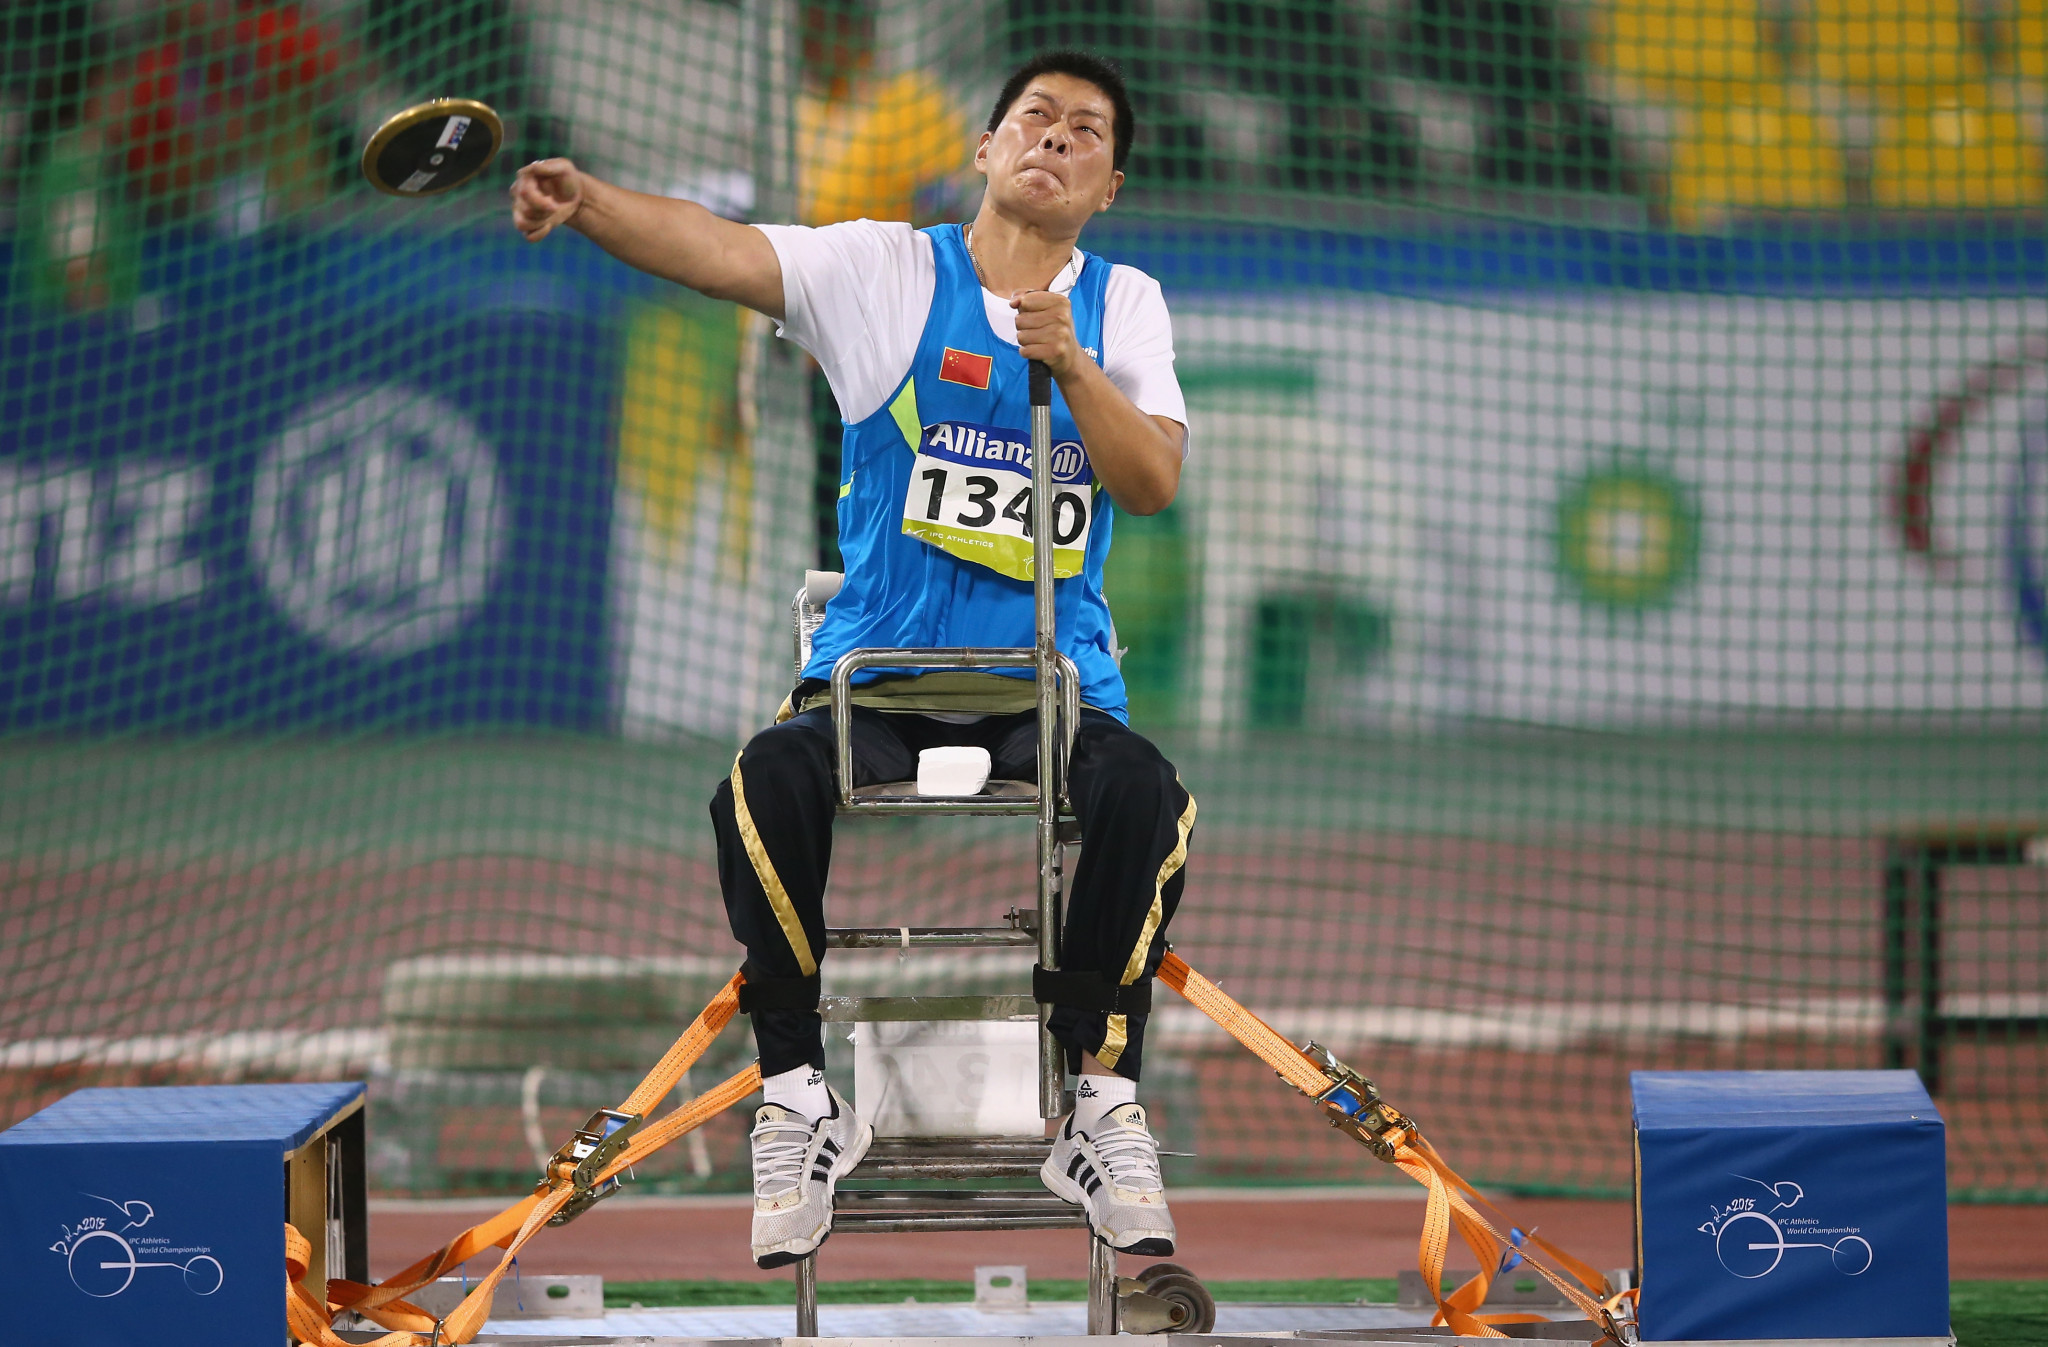 Liwan wins gold medals in two different disciplines on second day of World Para Athletics Grand Prix in Beijing